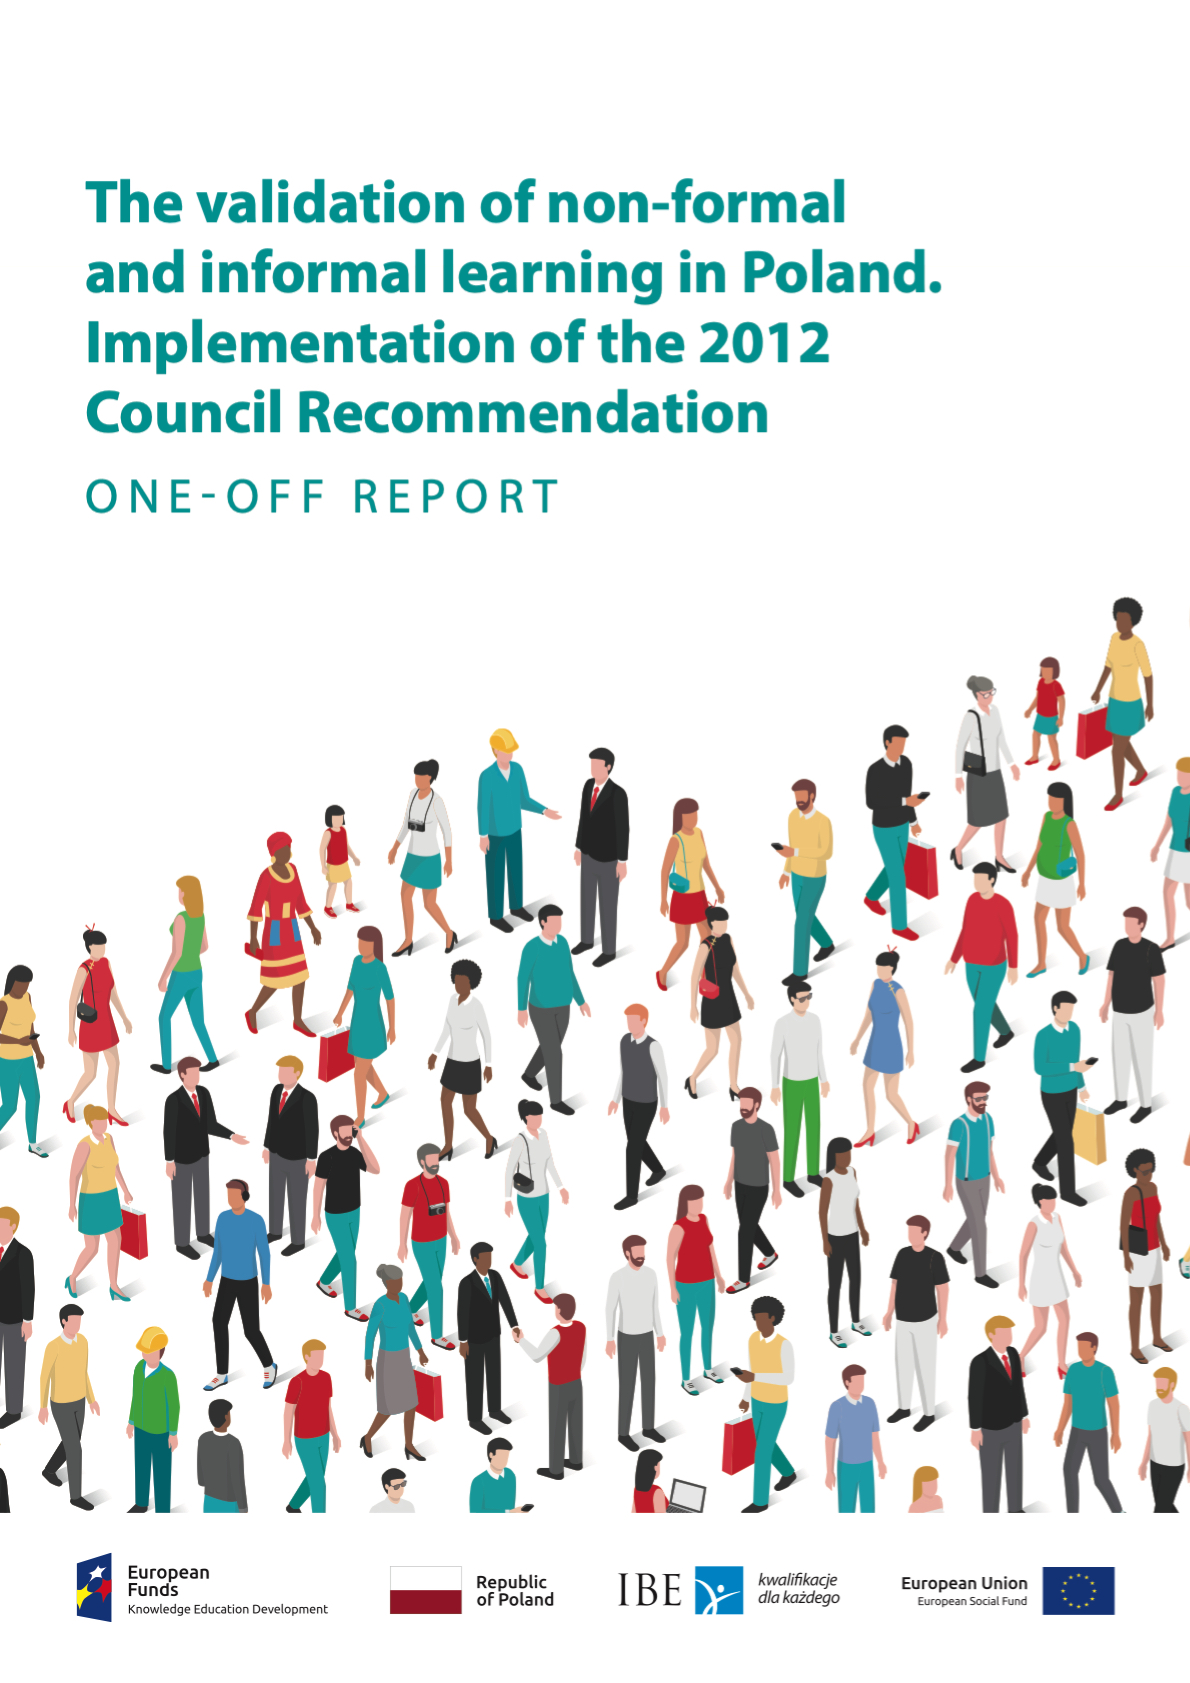 The validation of non-formal and informal learning in Poland. Implementation of the 2012 Council Recommendation